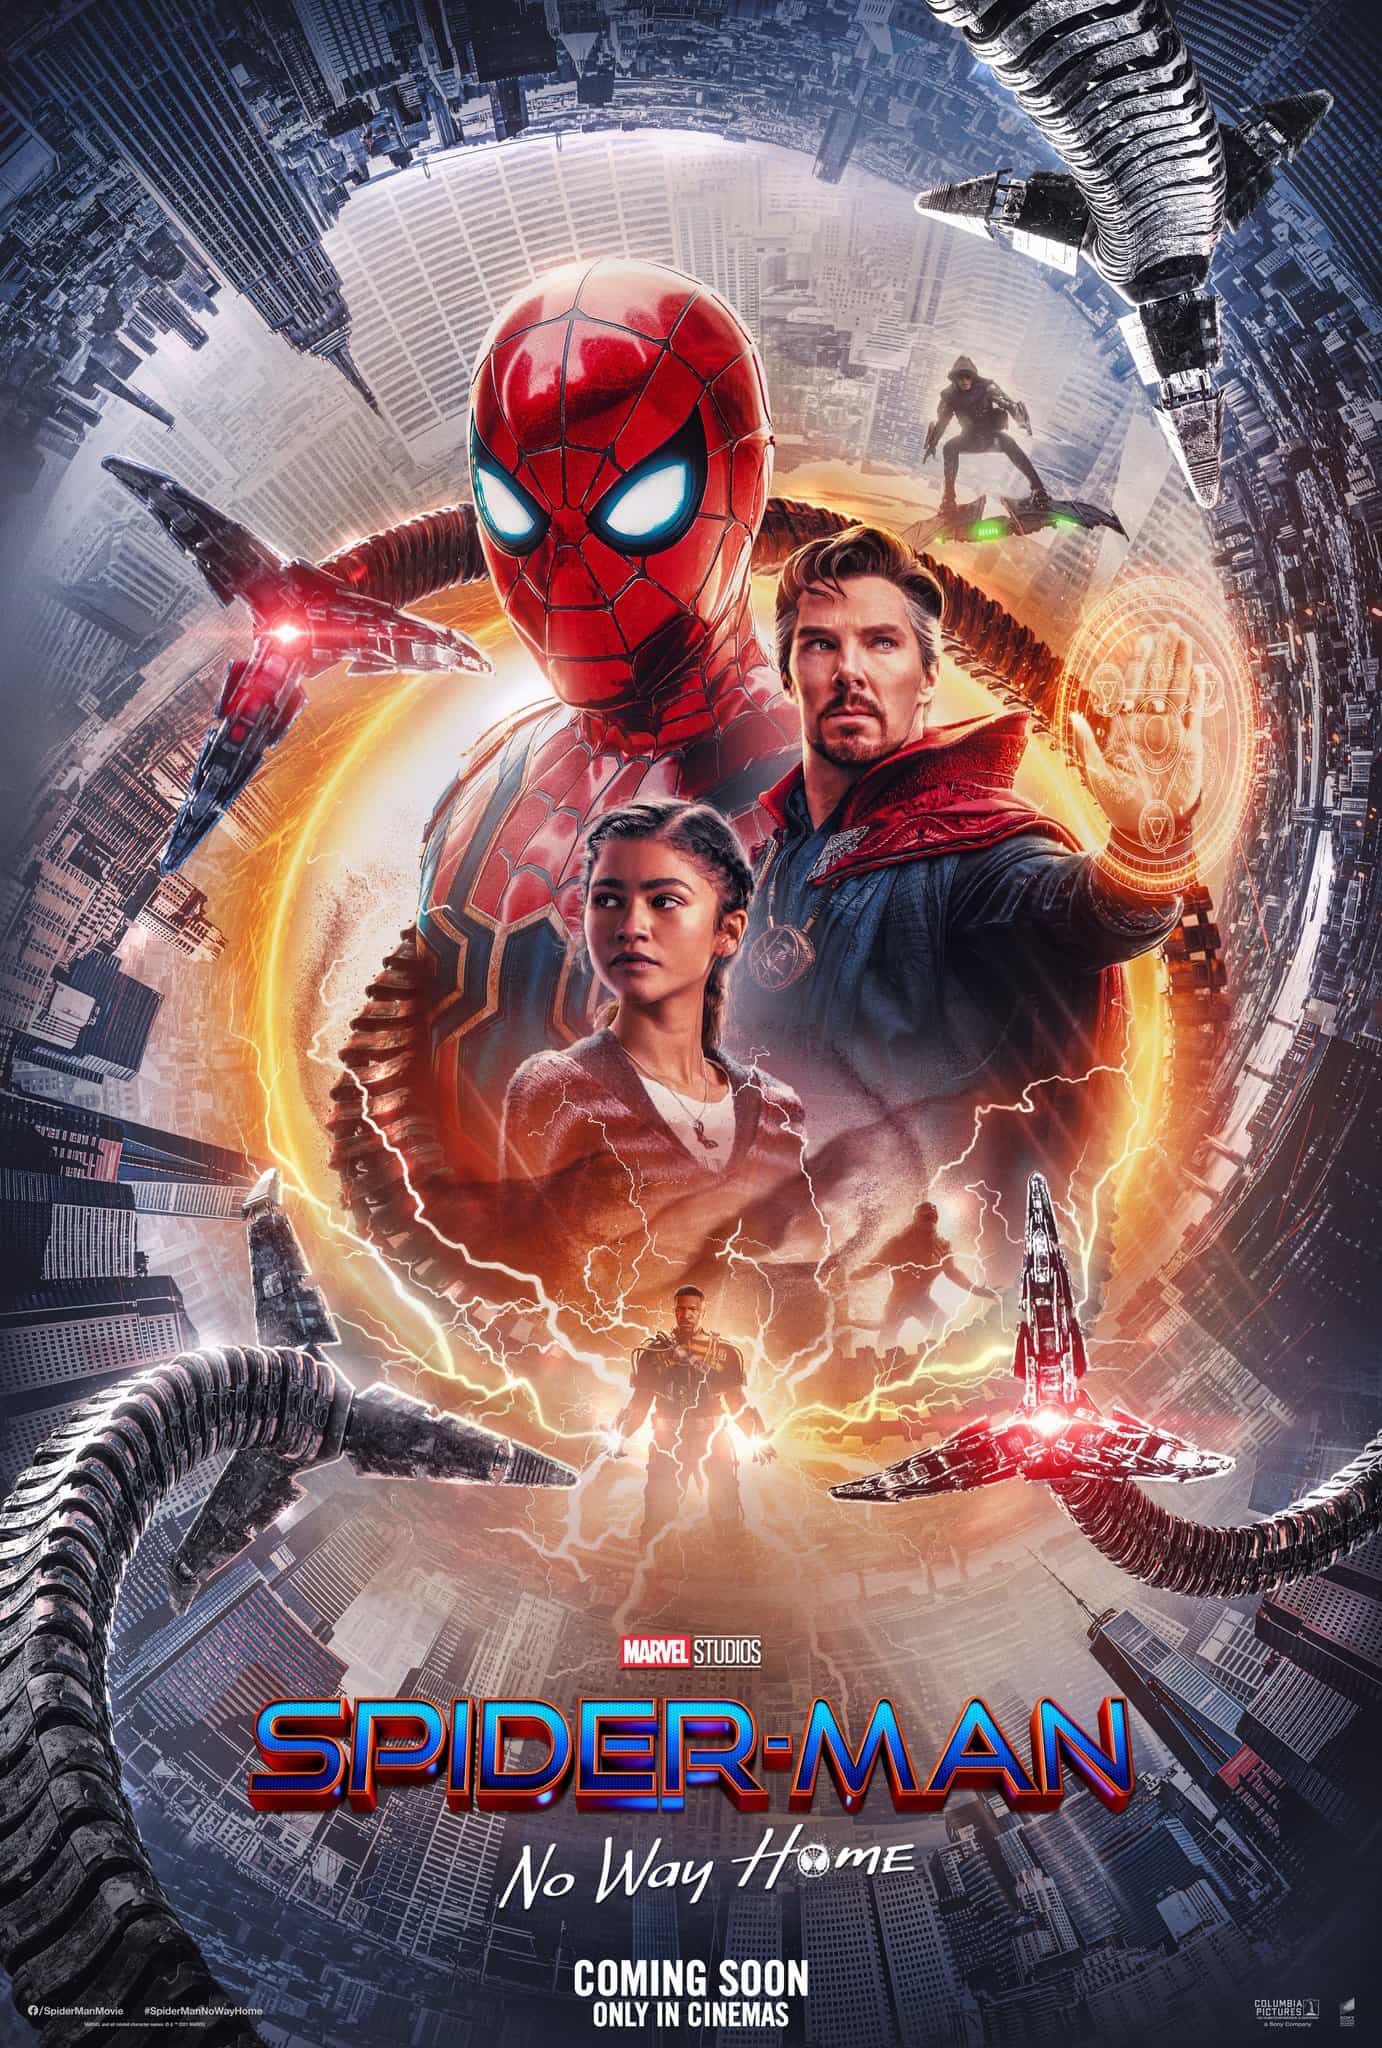 Global Box Office Figures 31st December 2021 - 2nd January 2022:  Spider-Man is top of the global box office over the new year